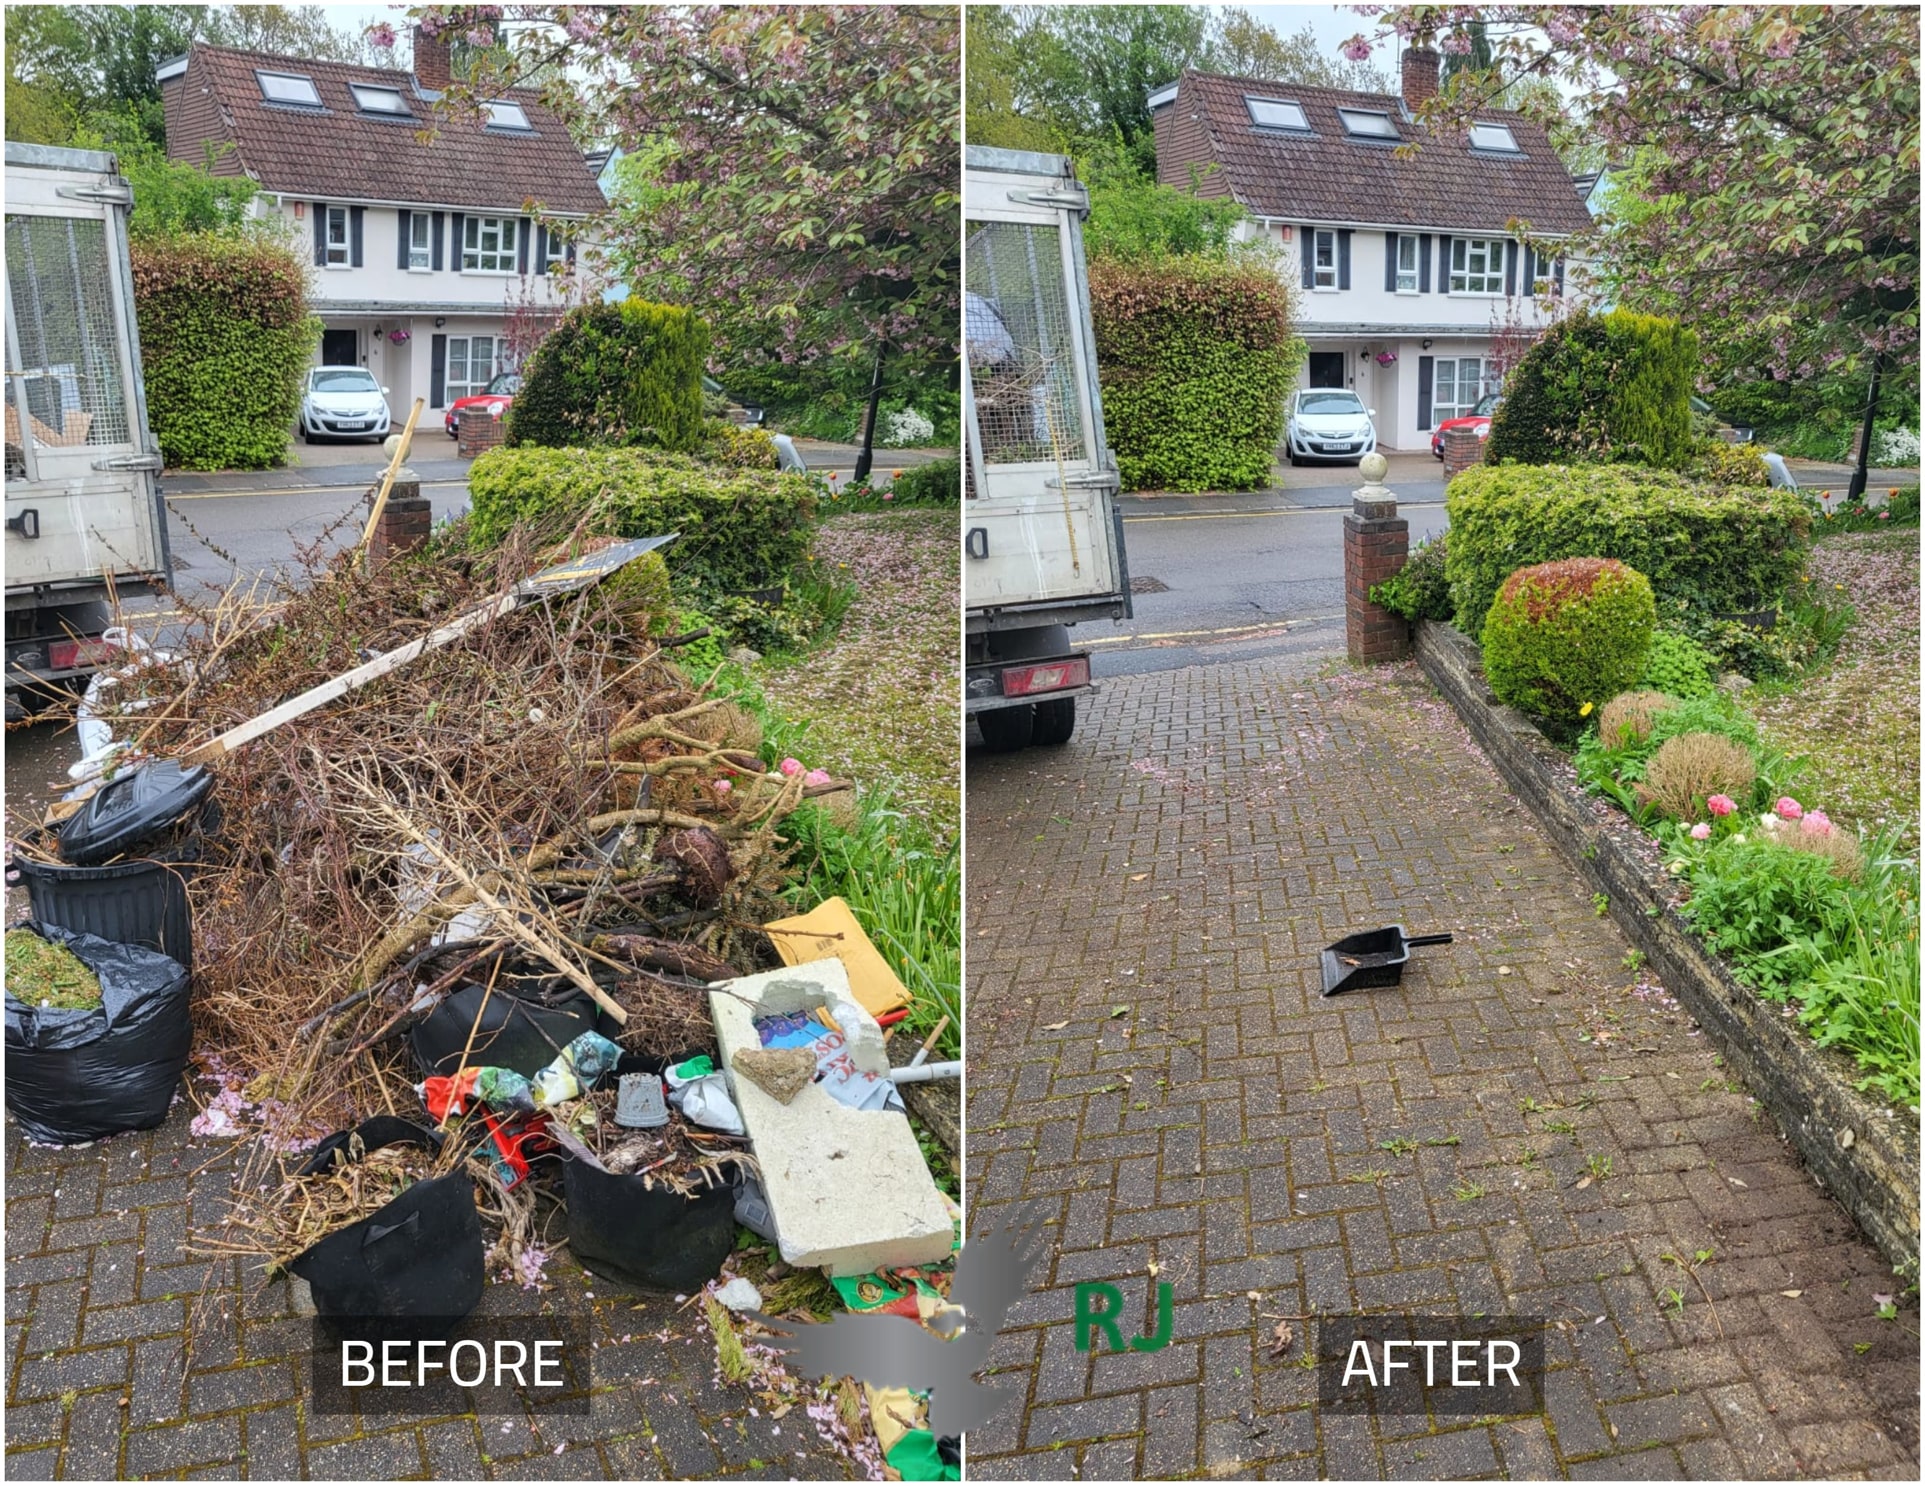 Professional Waste Clearance In Biggin Hill And Surrounding Areas